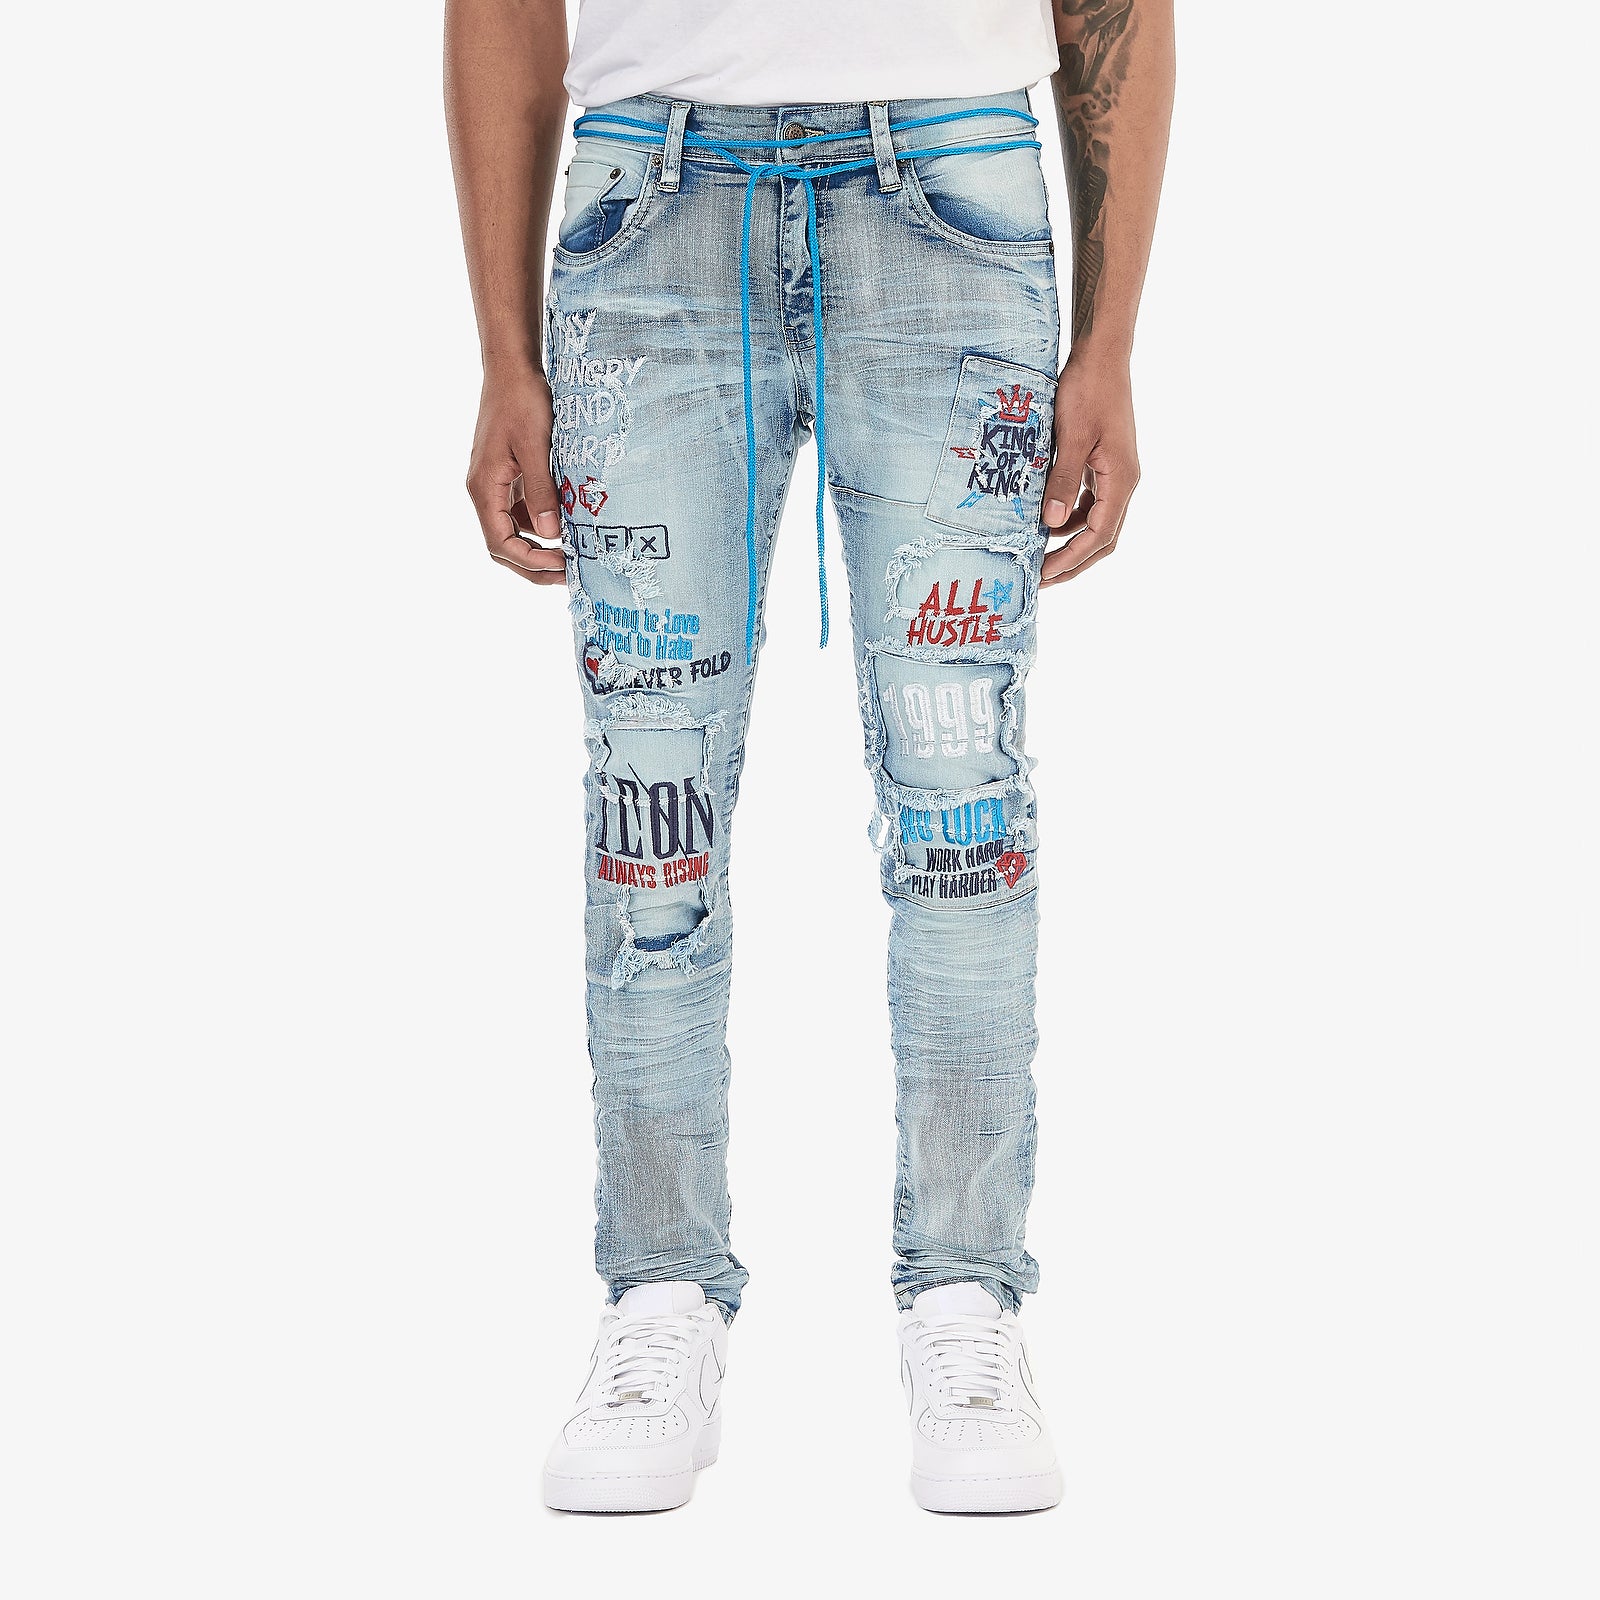 LIGHT SAND BLUE JEANS W/ COLOR EMBROIDERY